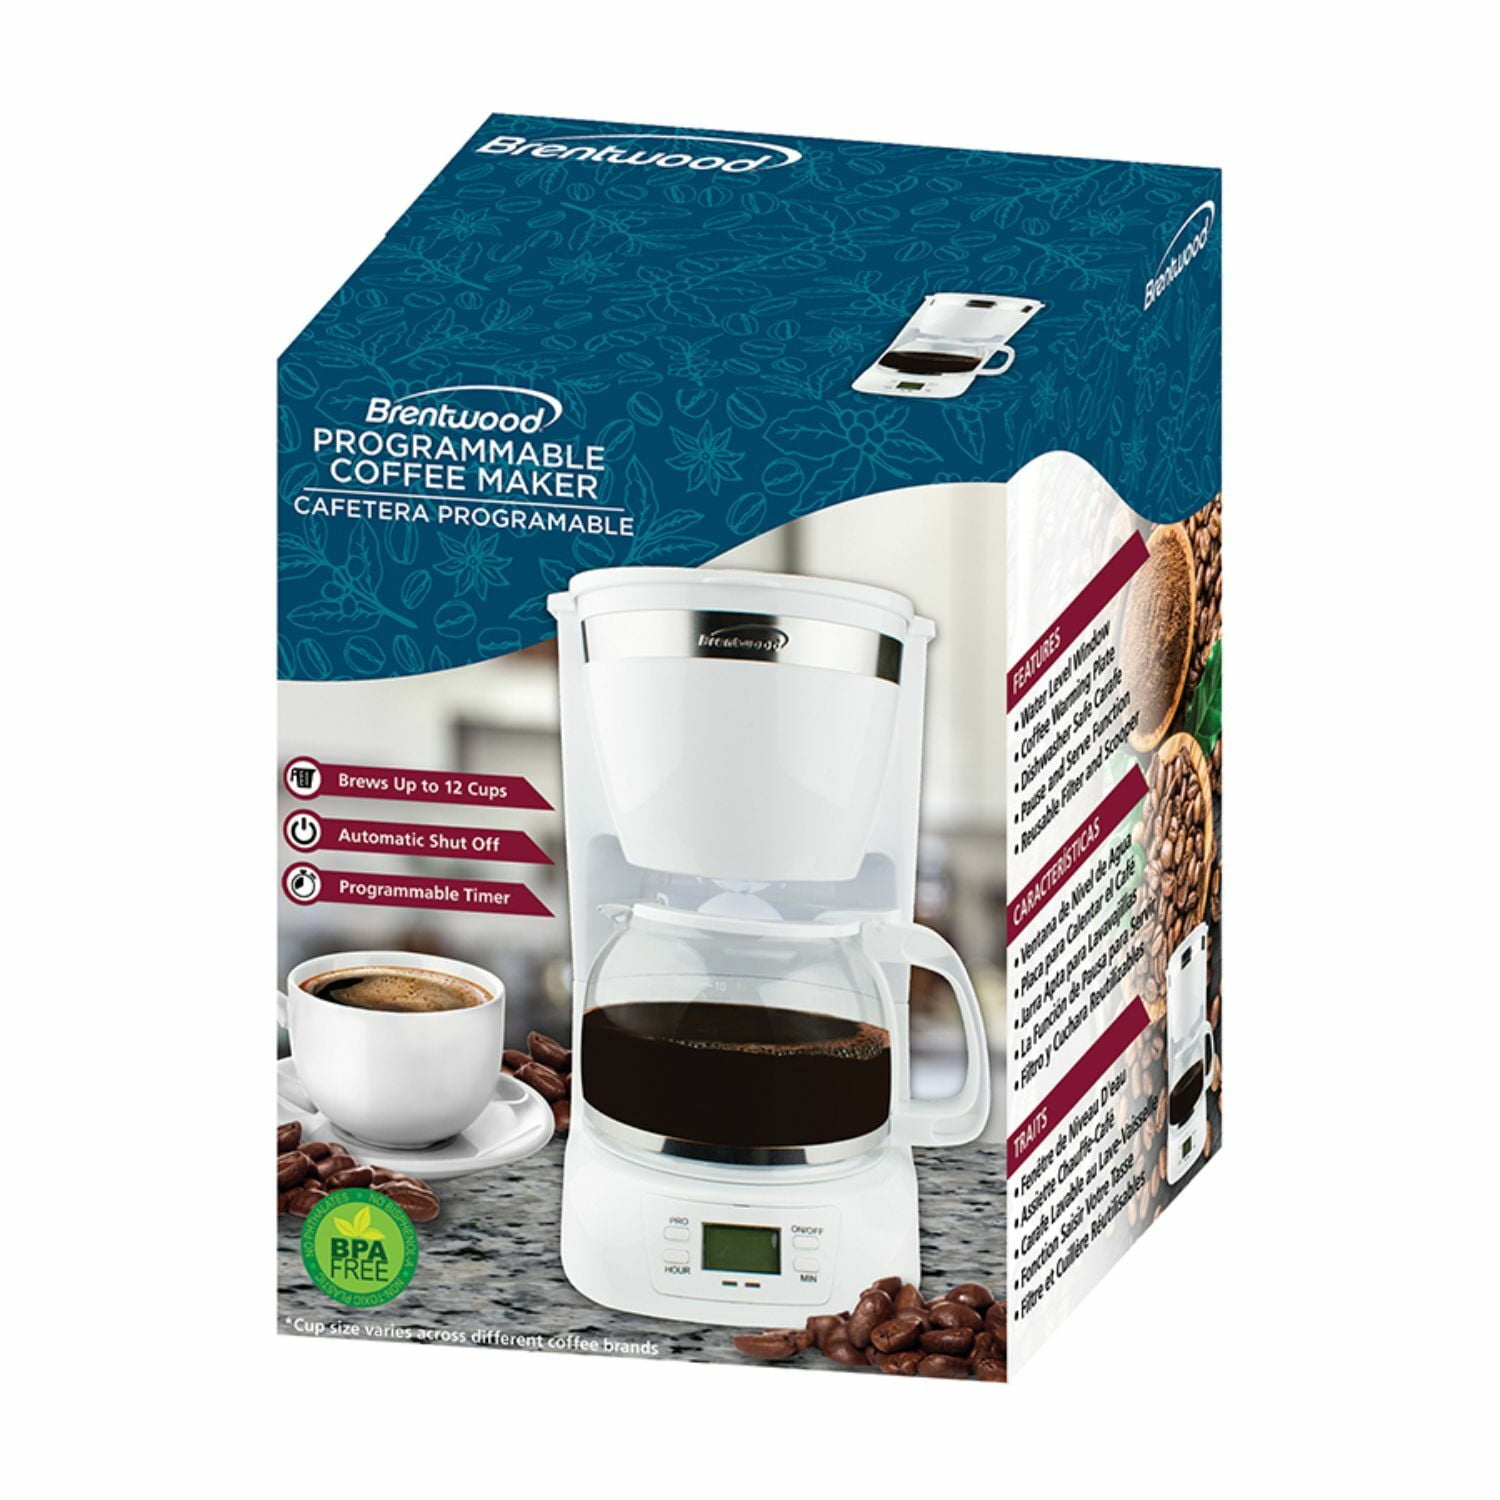 GTC White 10-Cup Coffee Maker